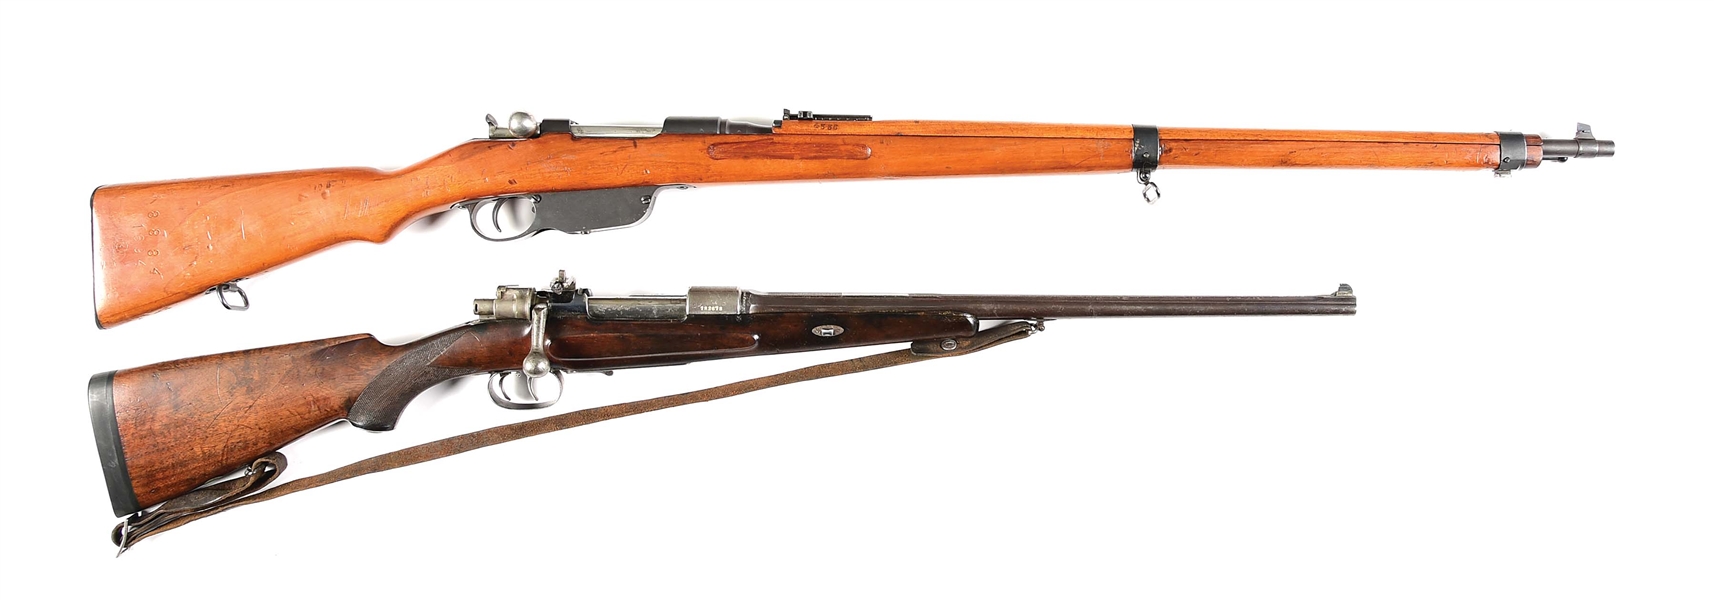 (C) LOT OF TWO: STEYR 1895 AND MAUSER 98 SPORTER BOLT ACTION RIFLES.